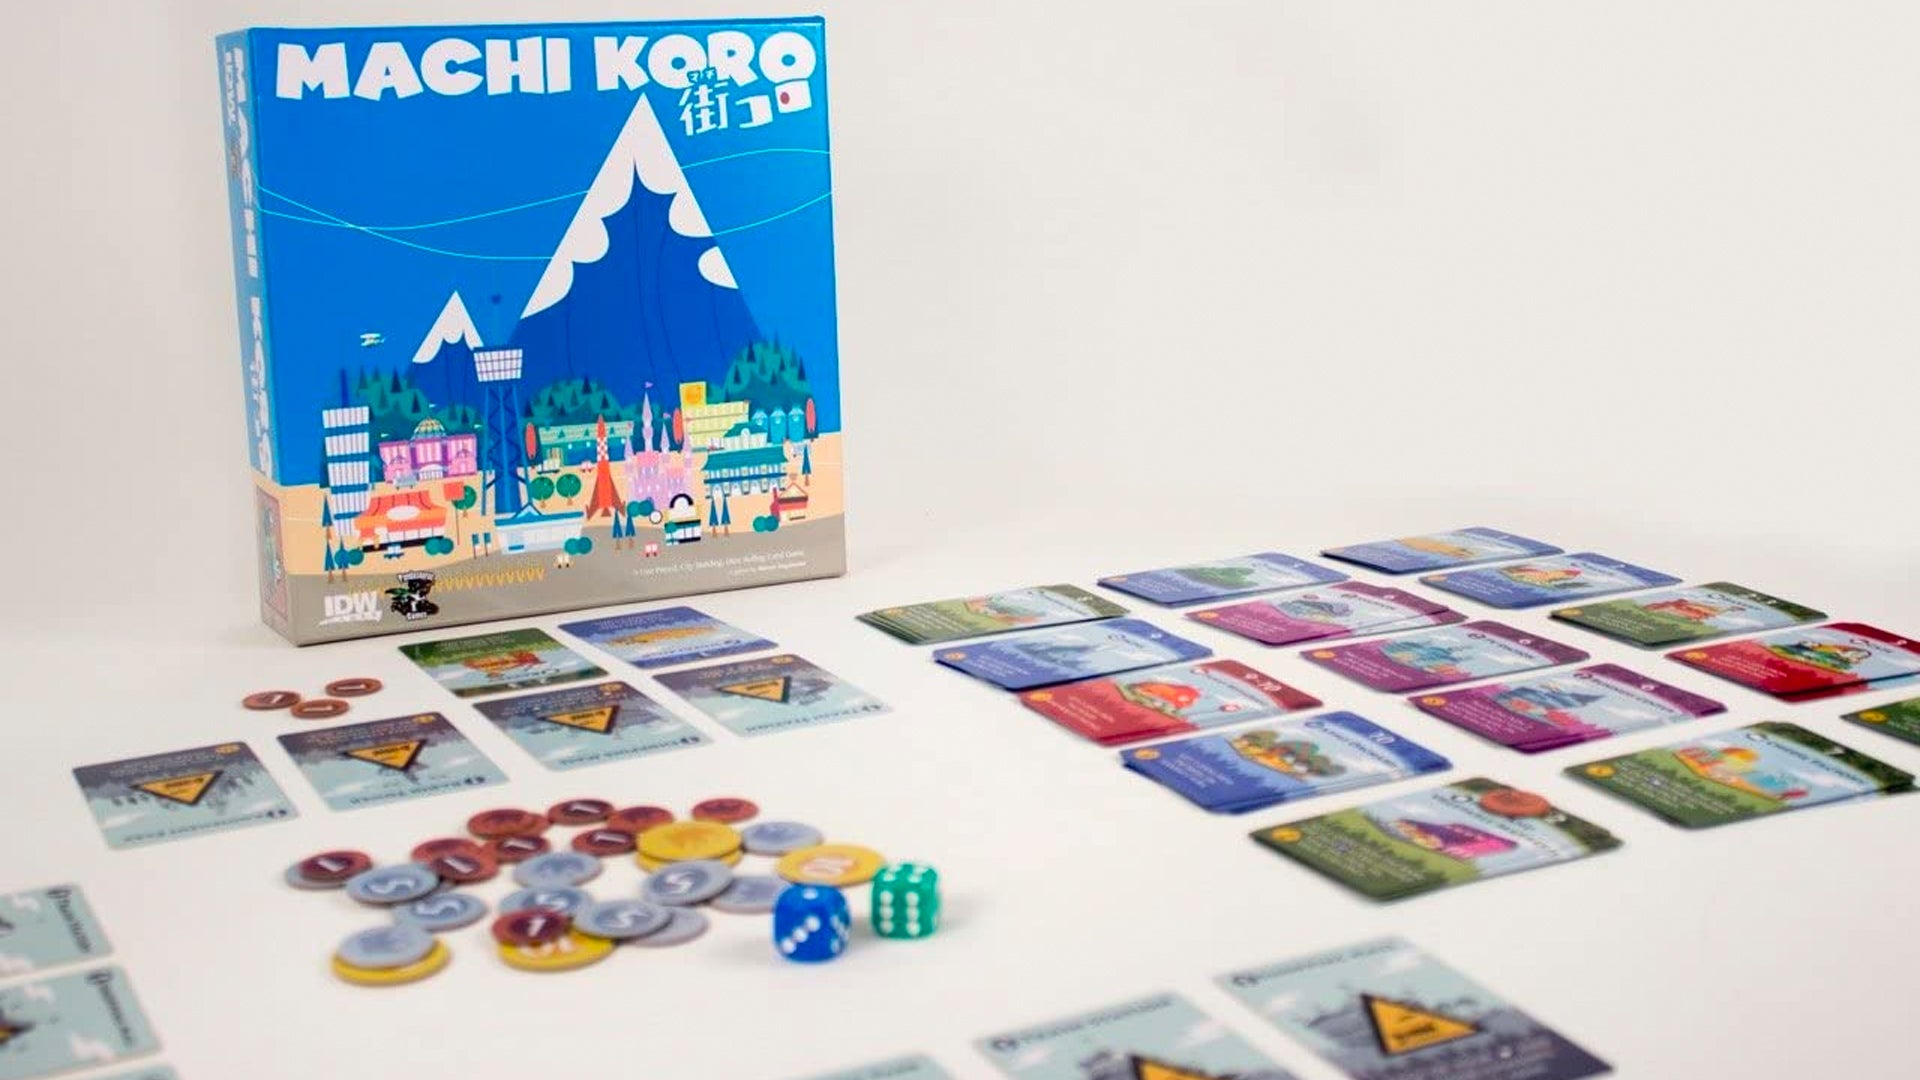 Image for Machi Koro and TMNT: Shadows of the Past publisher IDW Games will not release any more board games